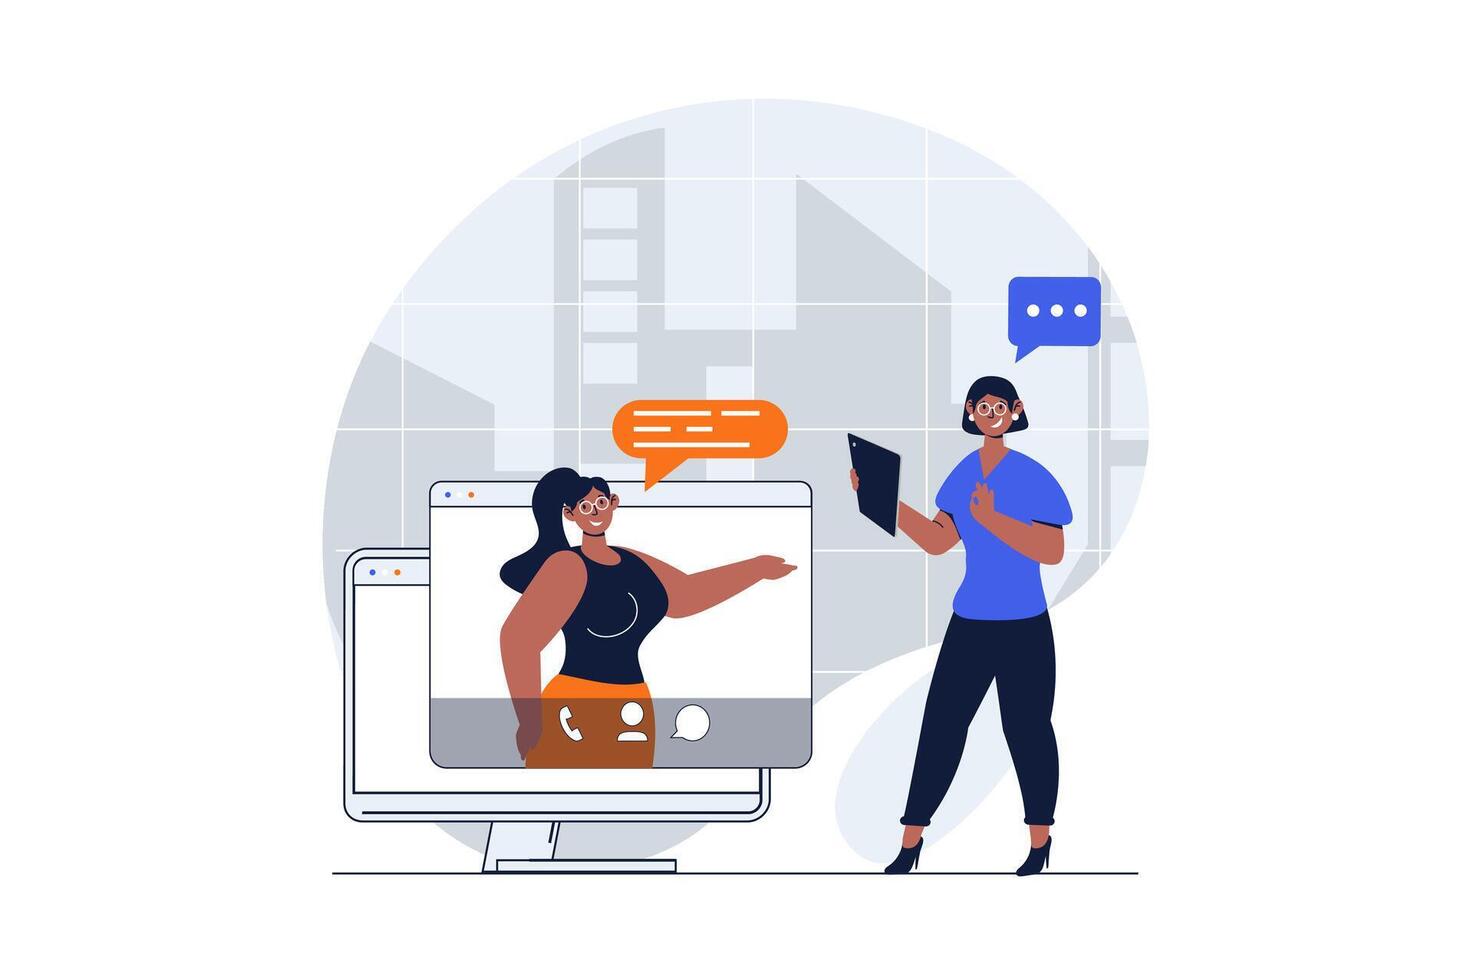 Video conference web concept with character scene. Women talking and discussing tasks via virtual video chat. People situation in flat design. Vector illustration for social media marketing material.